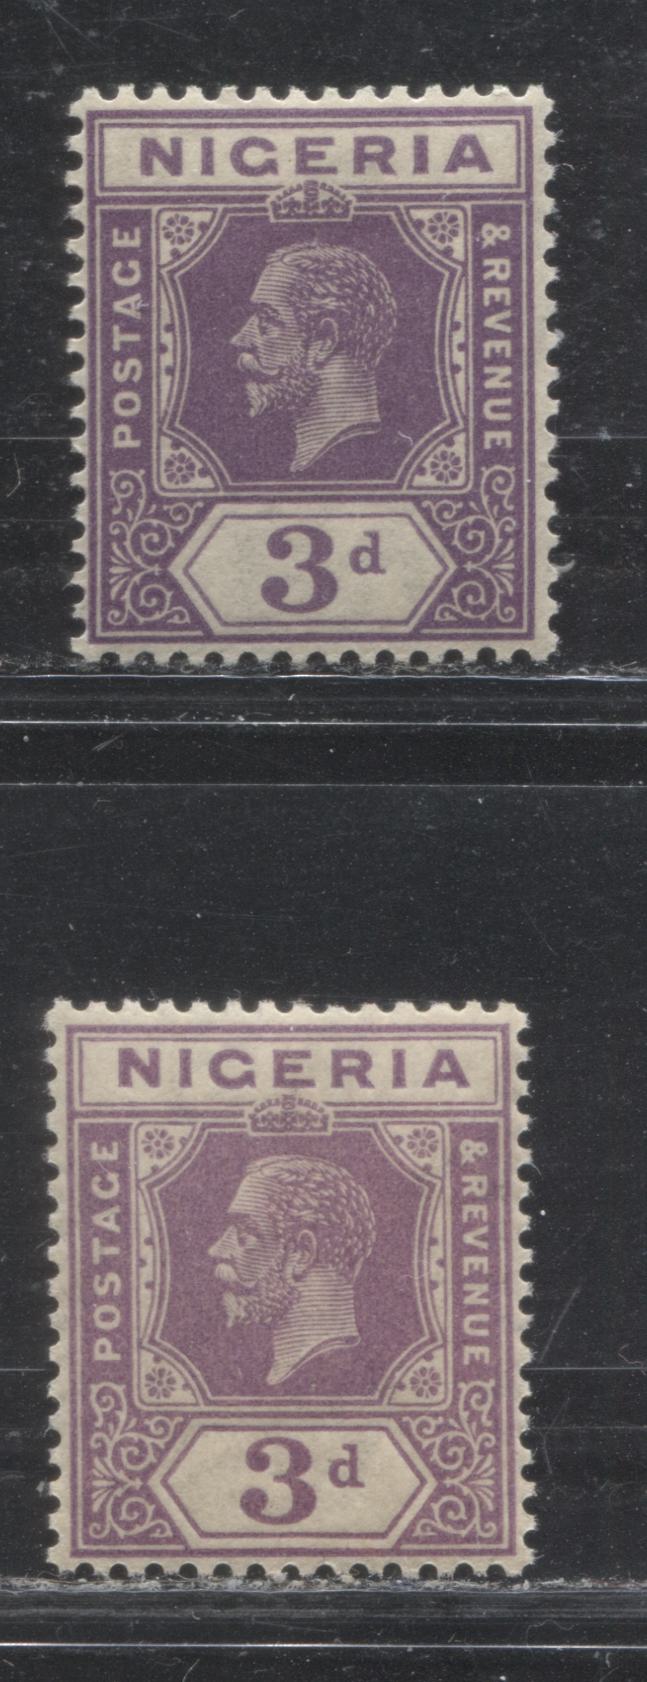 Lot 242 Nigeria SG# 22 3d Light Purple King George V, 1921-1932 Multiple Script CA Imperium Keyplate Issue, Two VFNH Examples, Dies 1 and 2